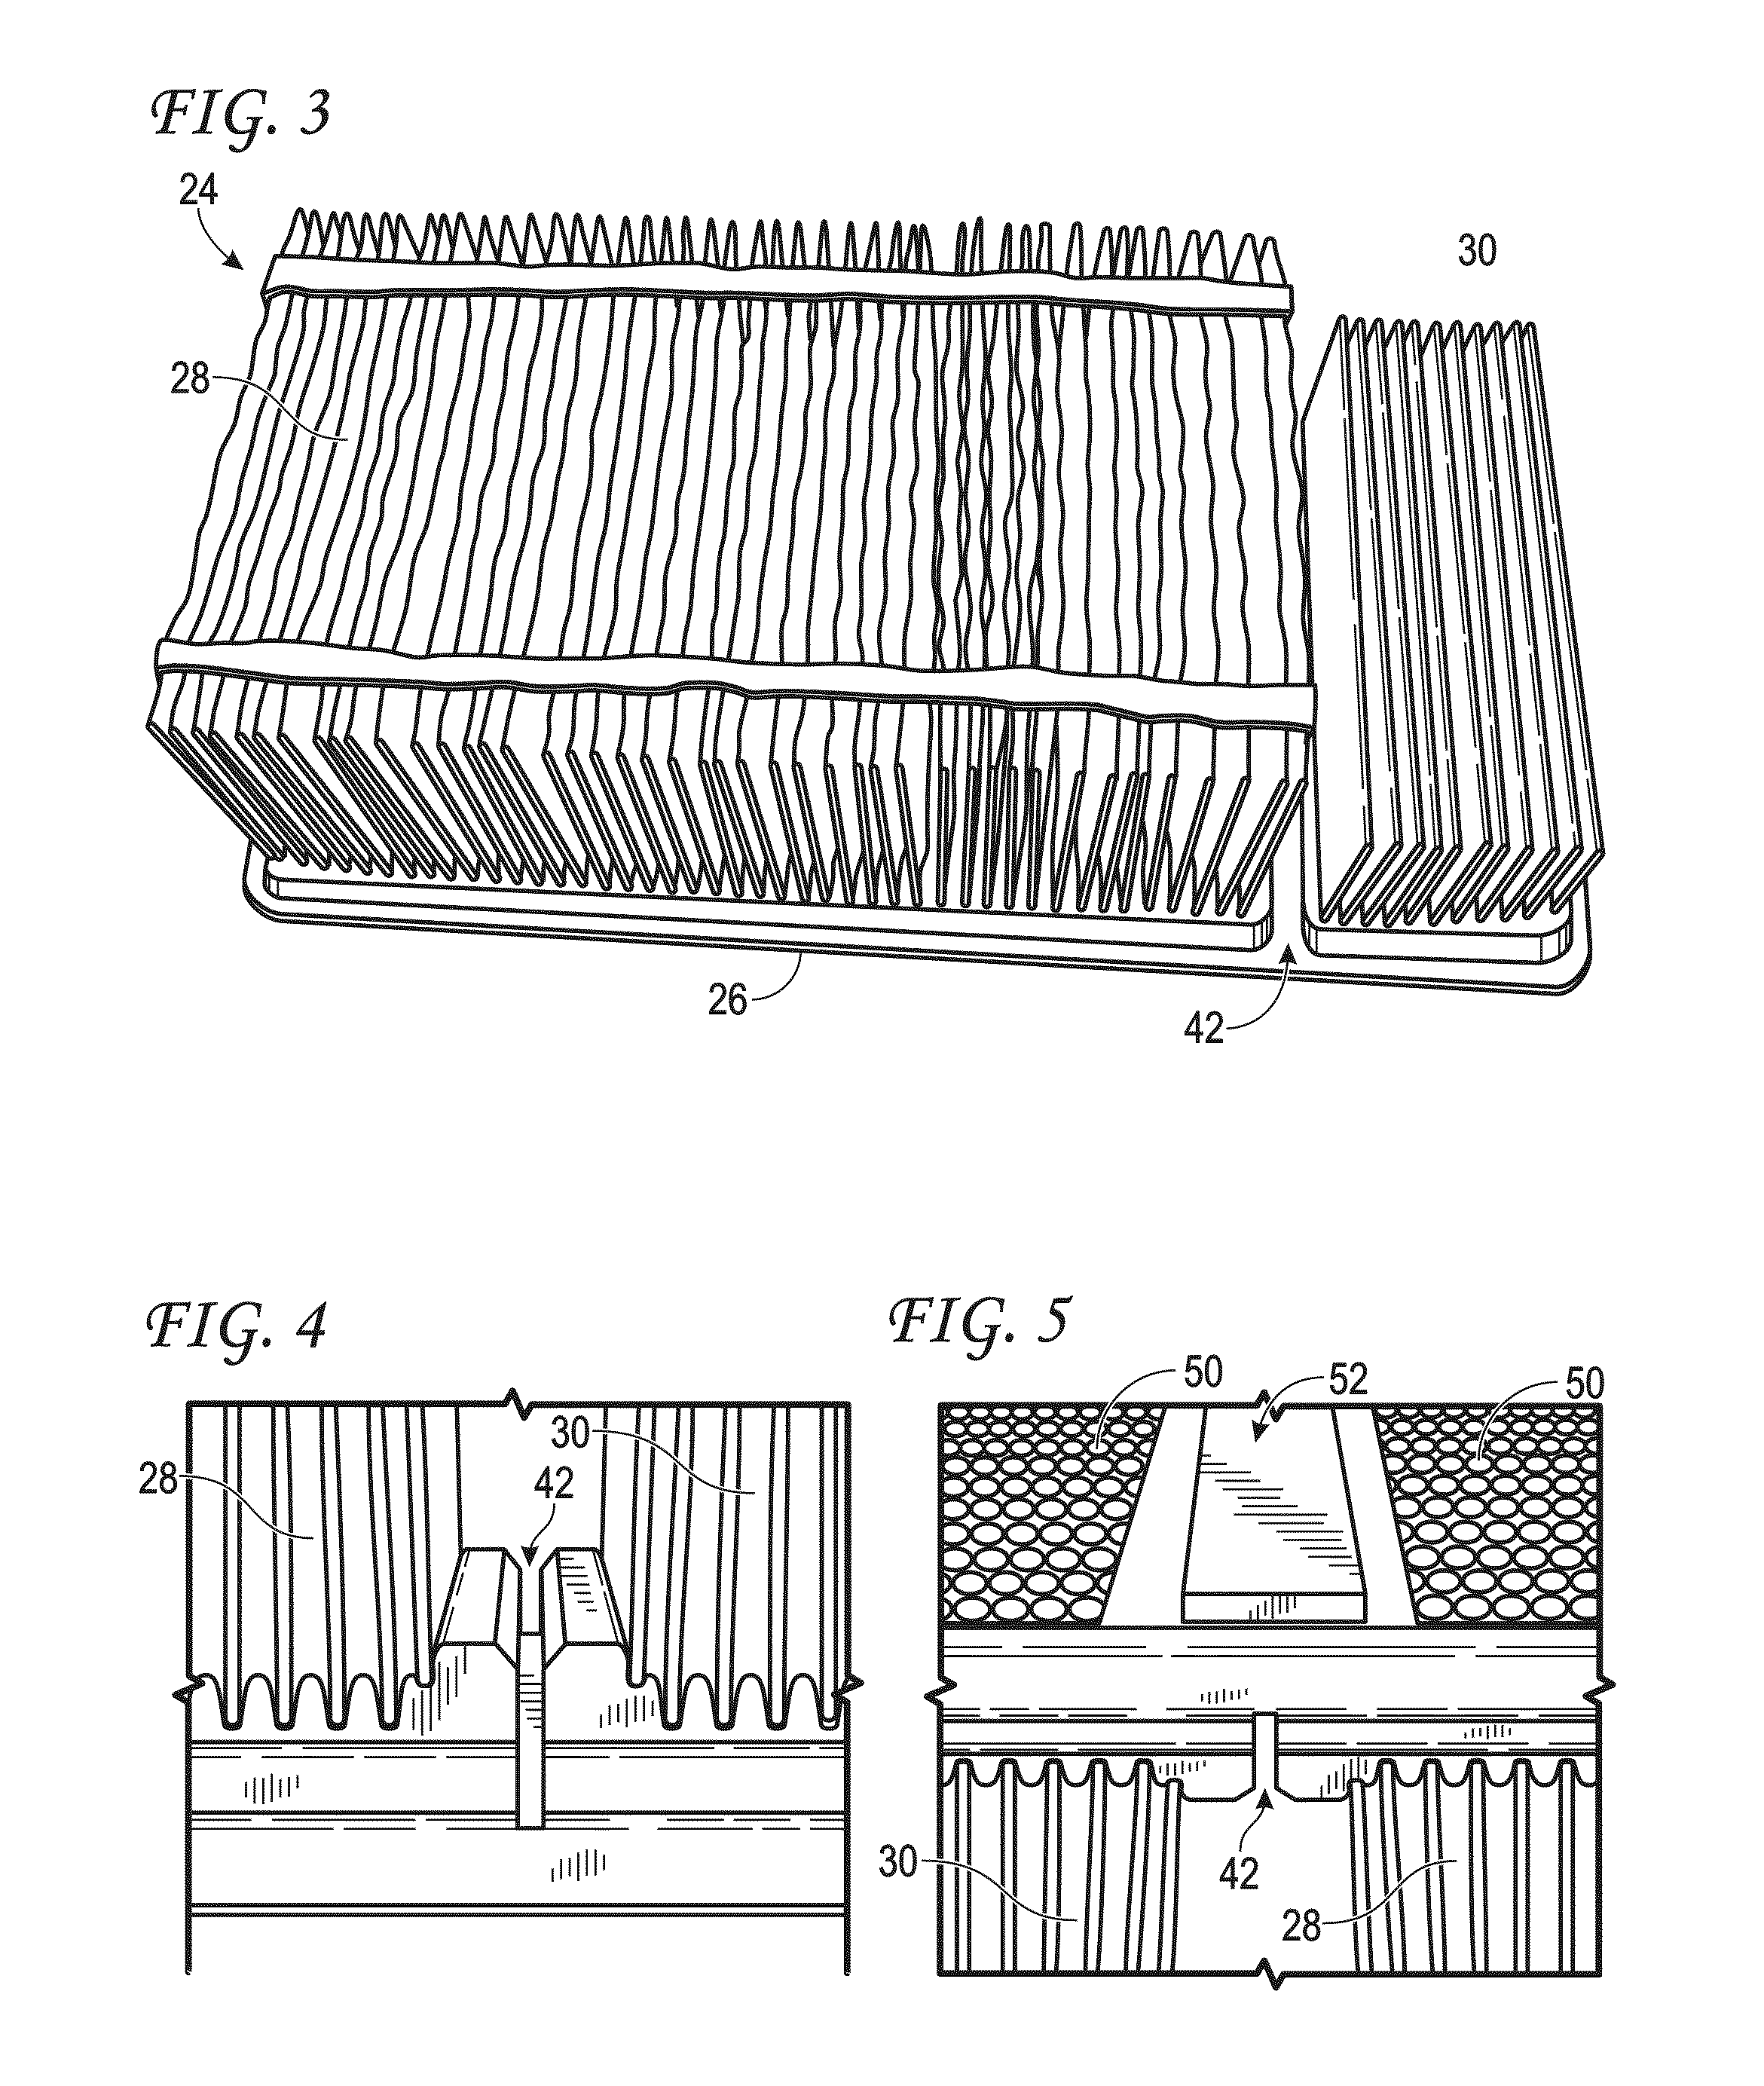 Air cleaner filter assembly for motor vehicles operating in extreme weather conditions